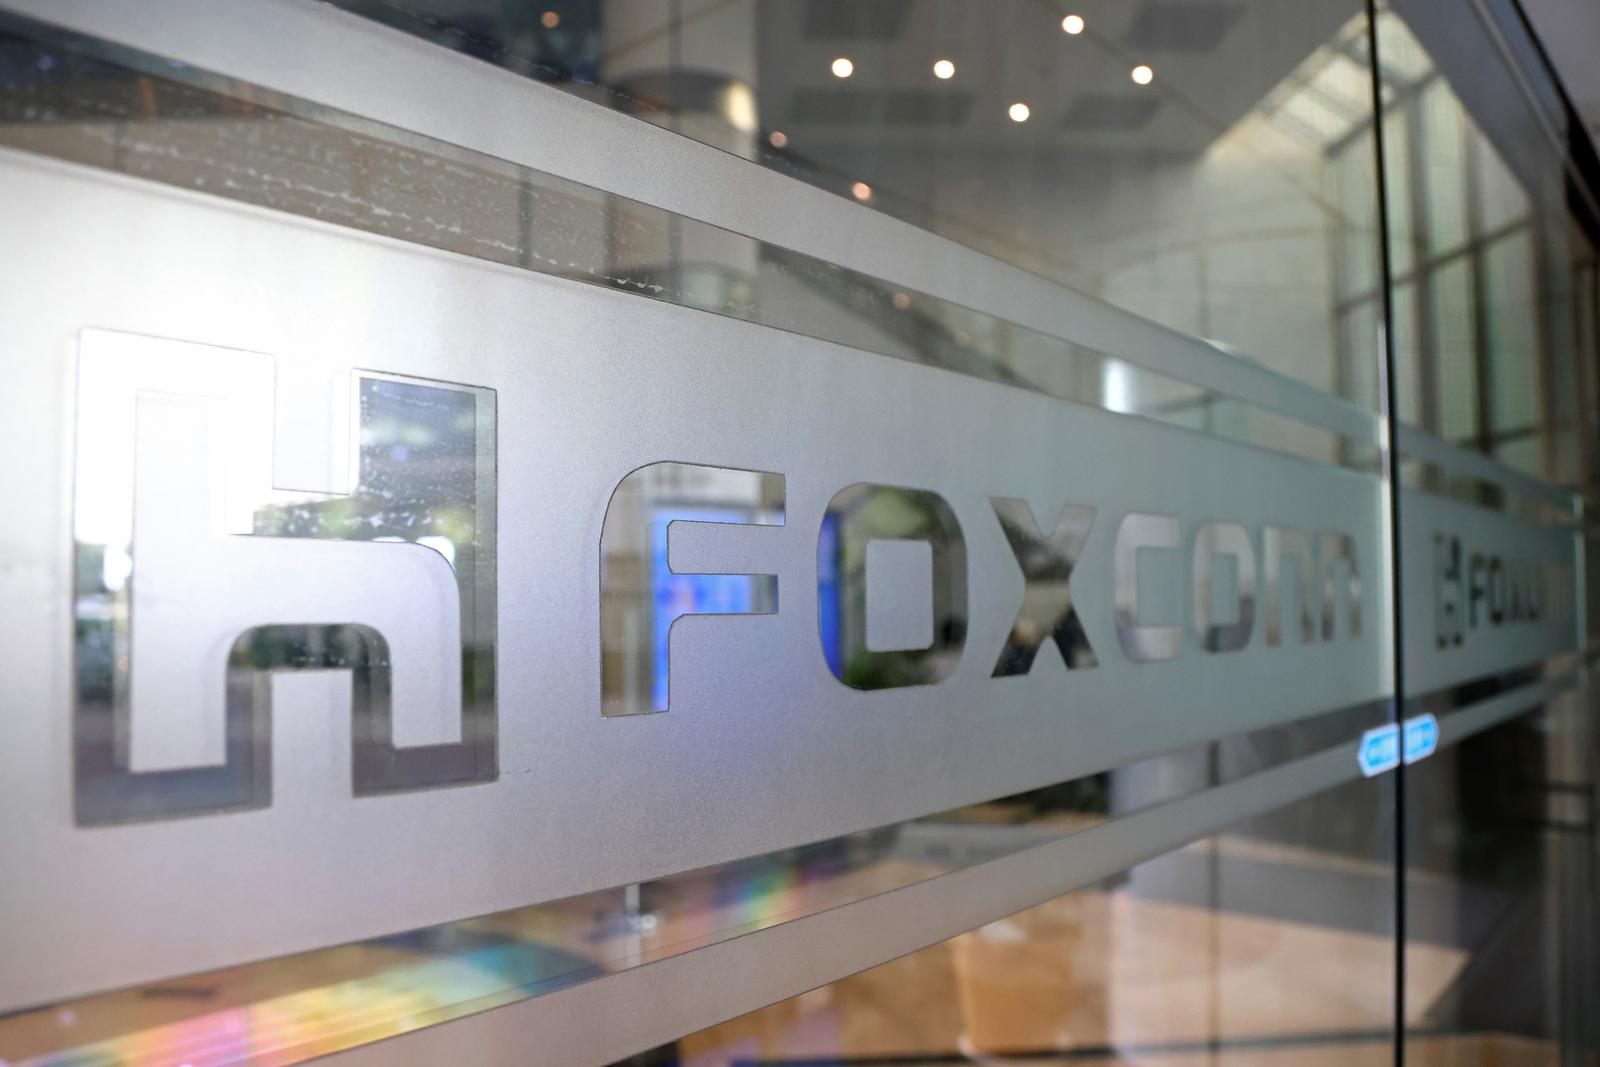 Vietnam gives Foxconn unit licence for $270 million plant to produce laptops, tablets